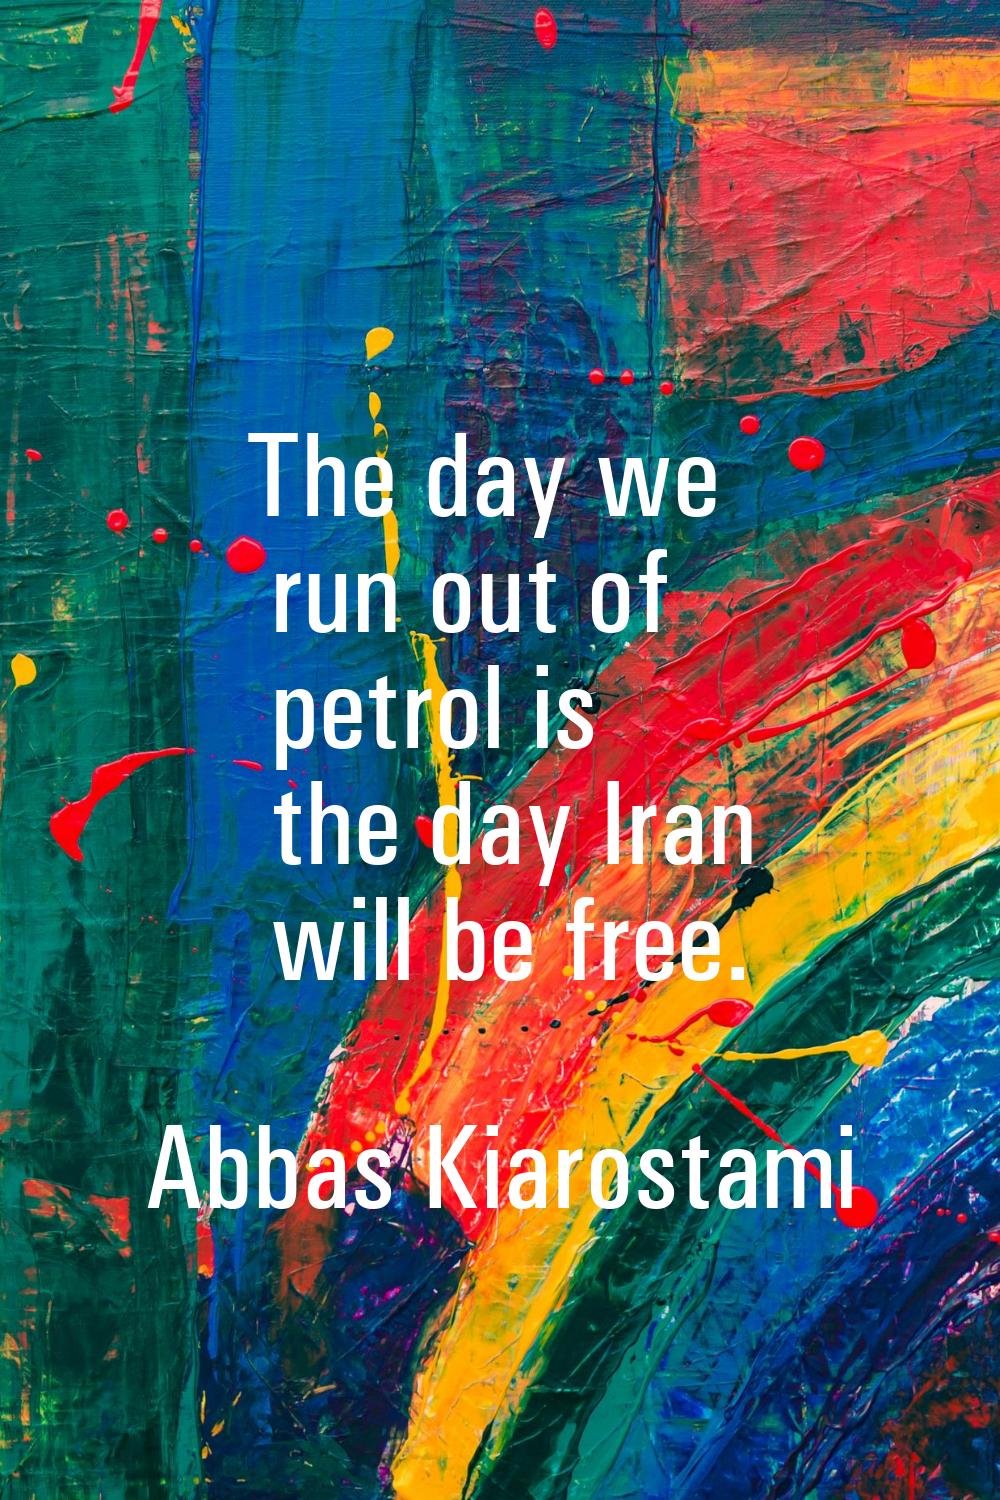 The day we run out of petrol is the day Iran will be free.